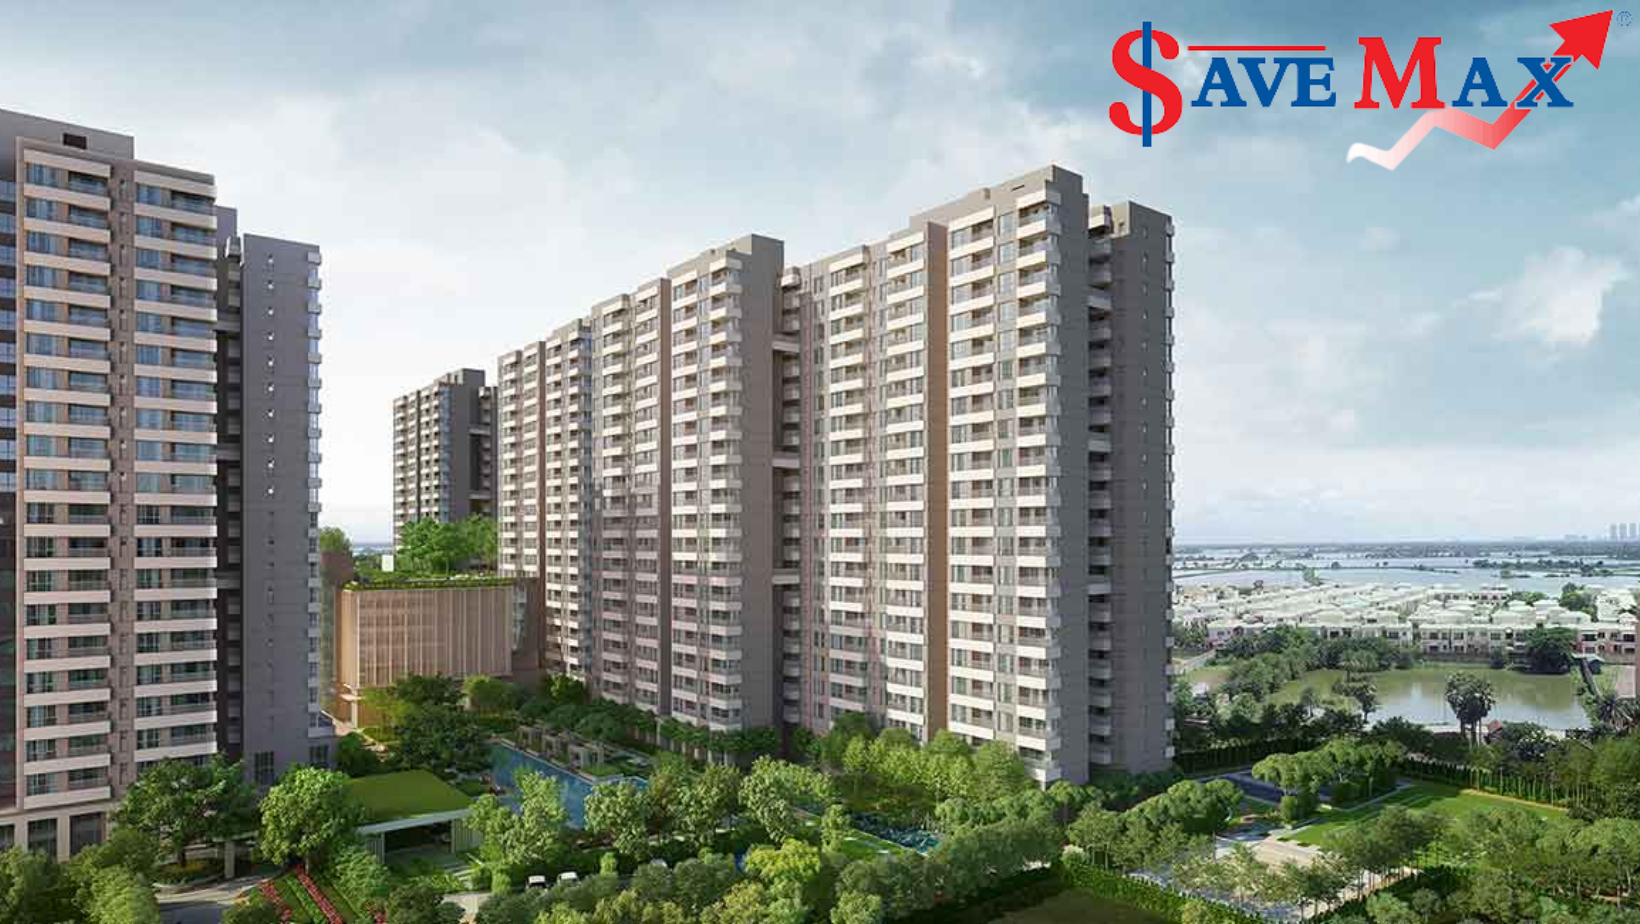 Flats for Sale in Kolkata with Save Max Real Estate